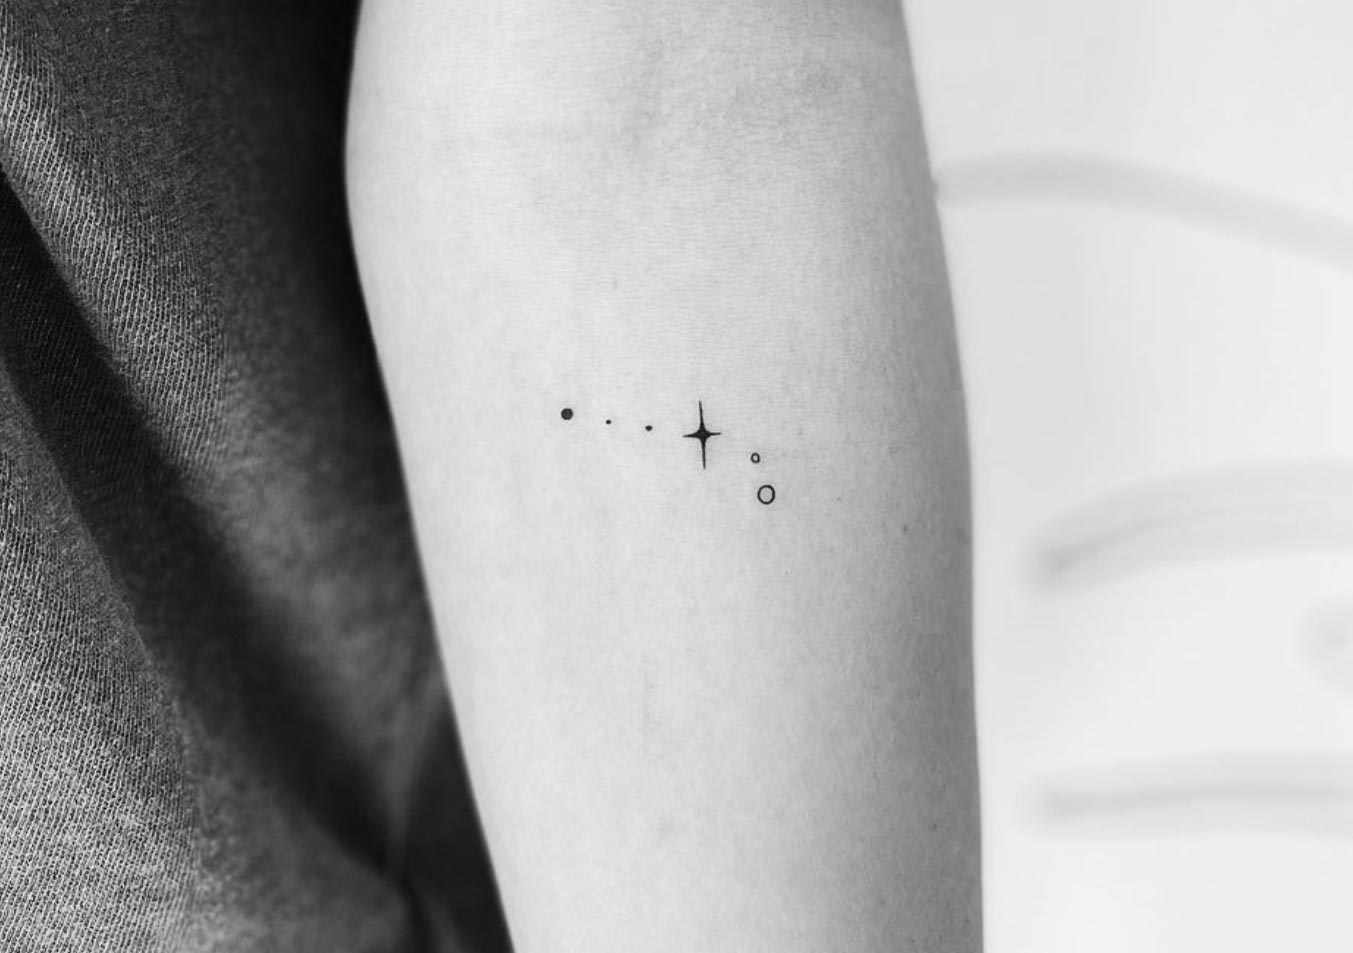 Symbols And Their Stories: Decoding Tattoo Meanings With Stylish.ae